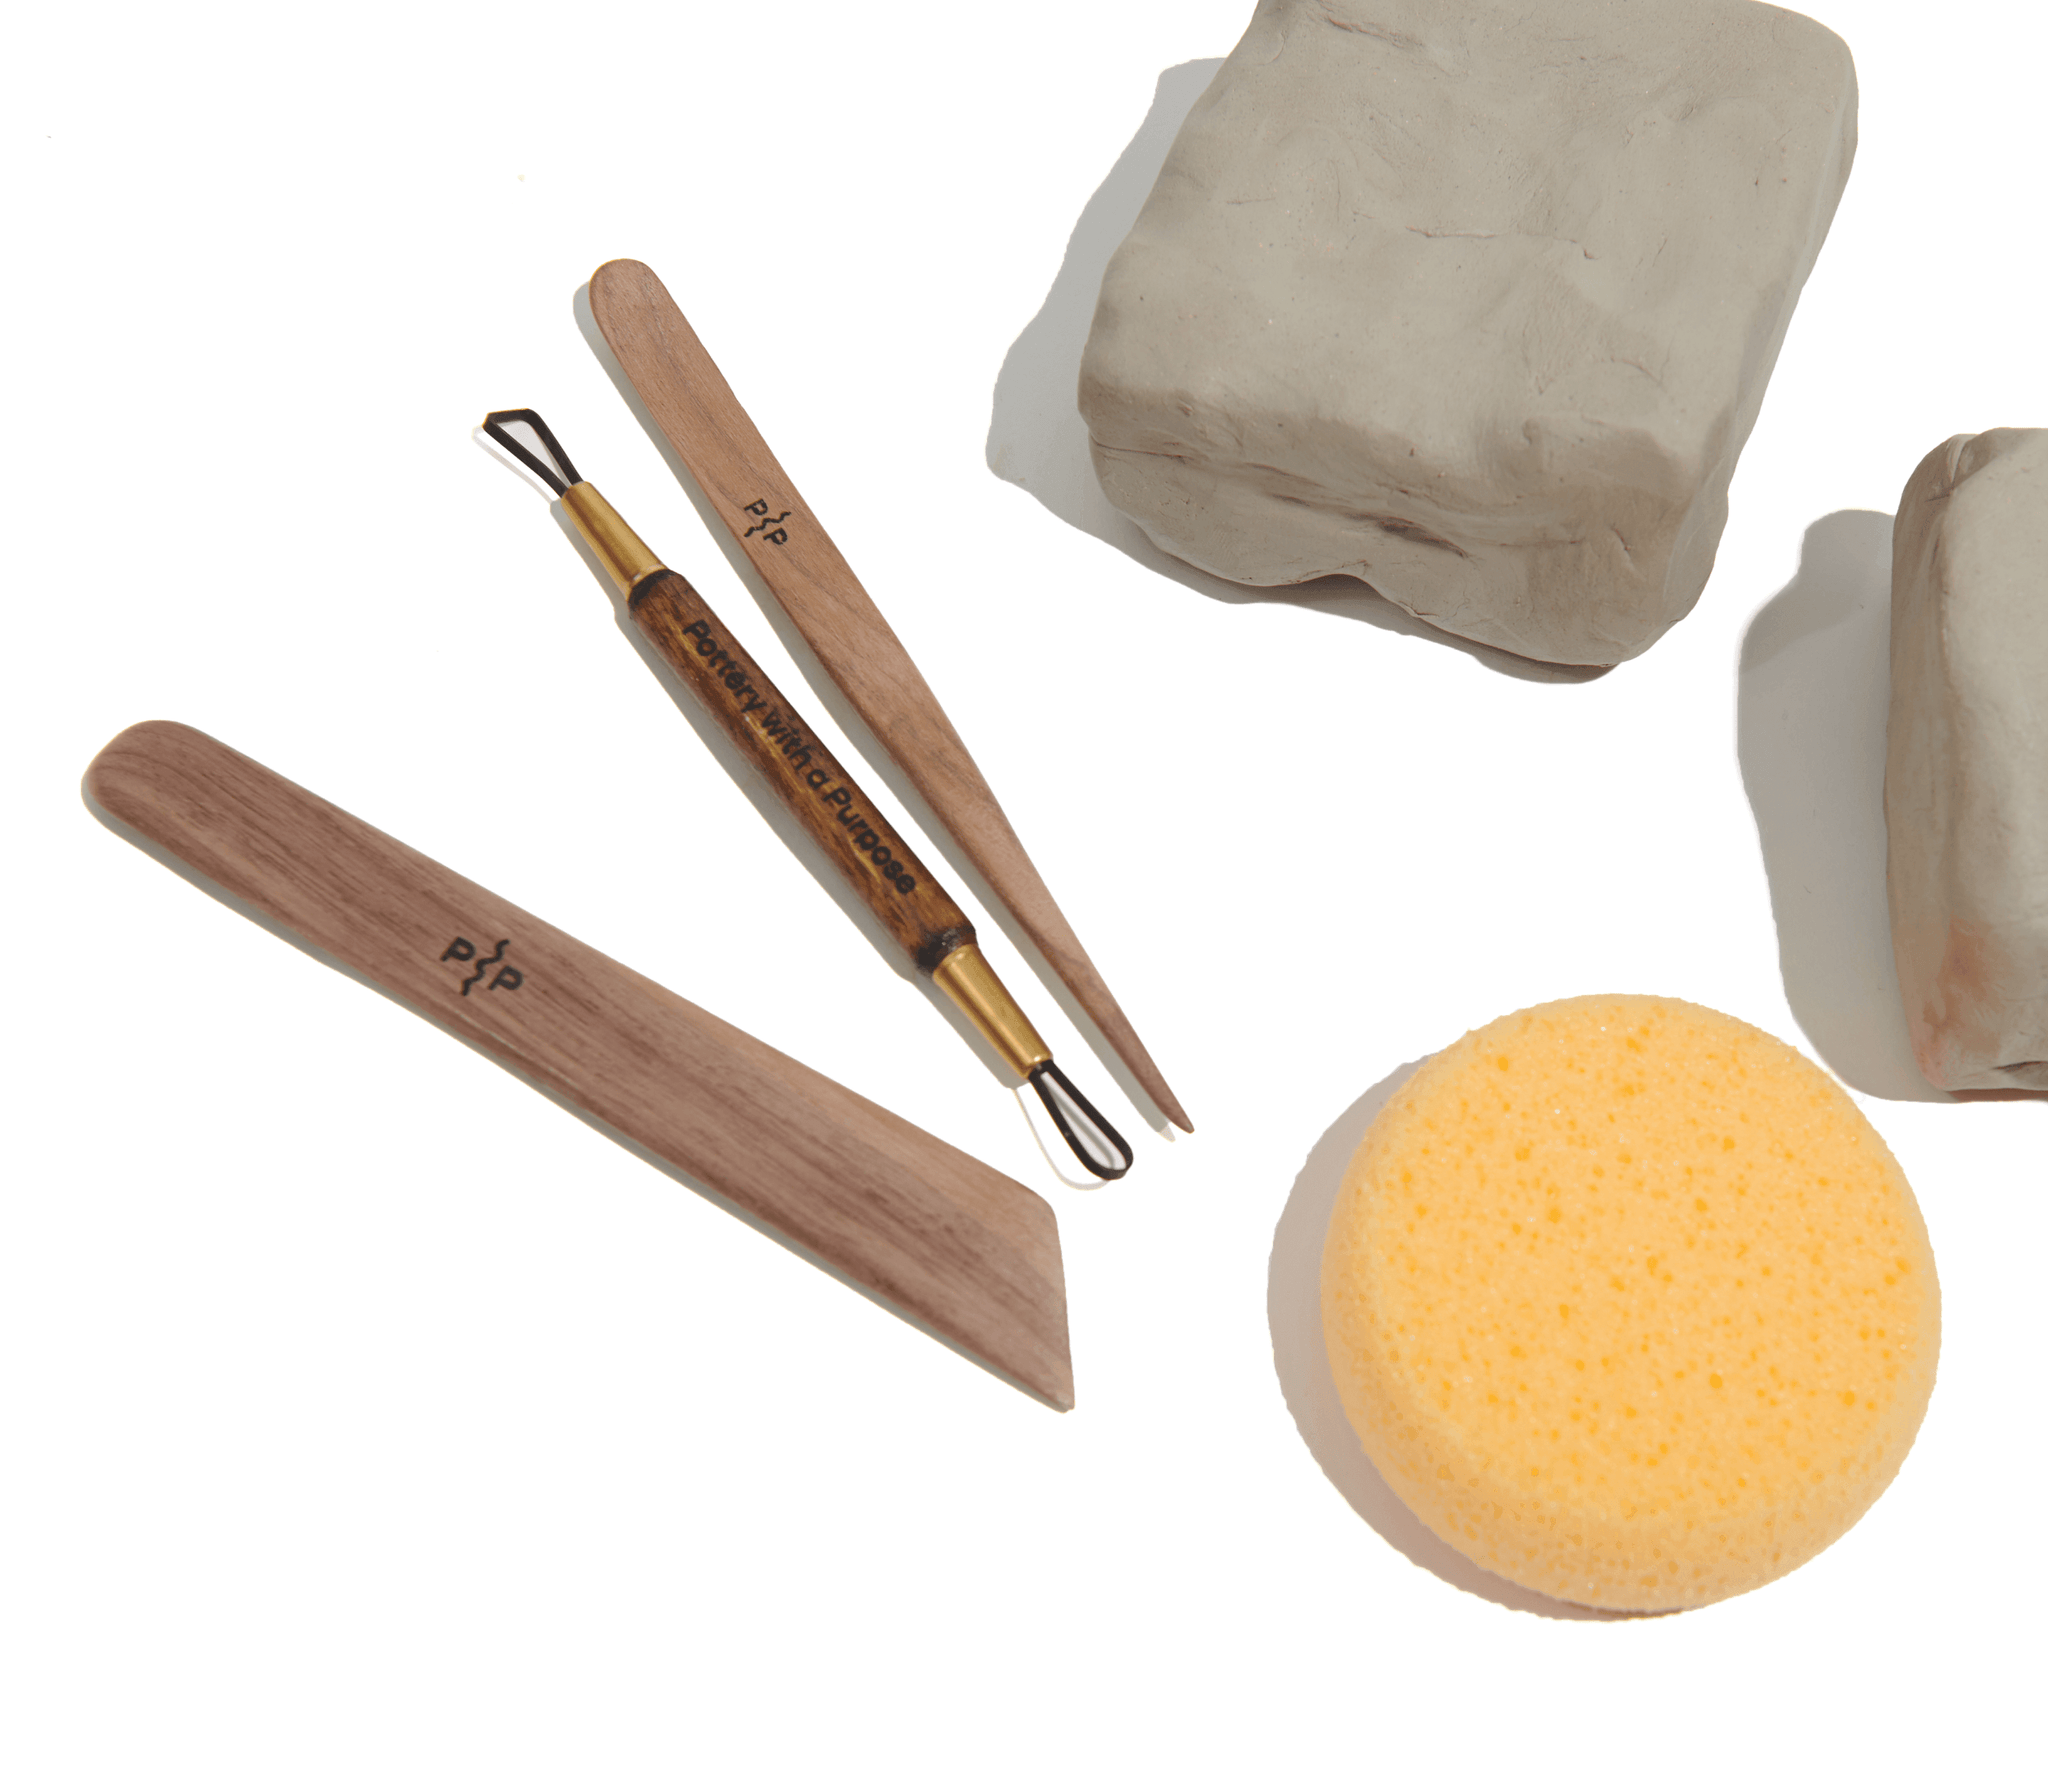 Céramiques is selling at-home pottery kits so you can do DIY ceramics